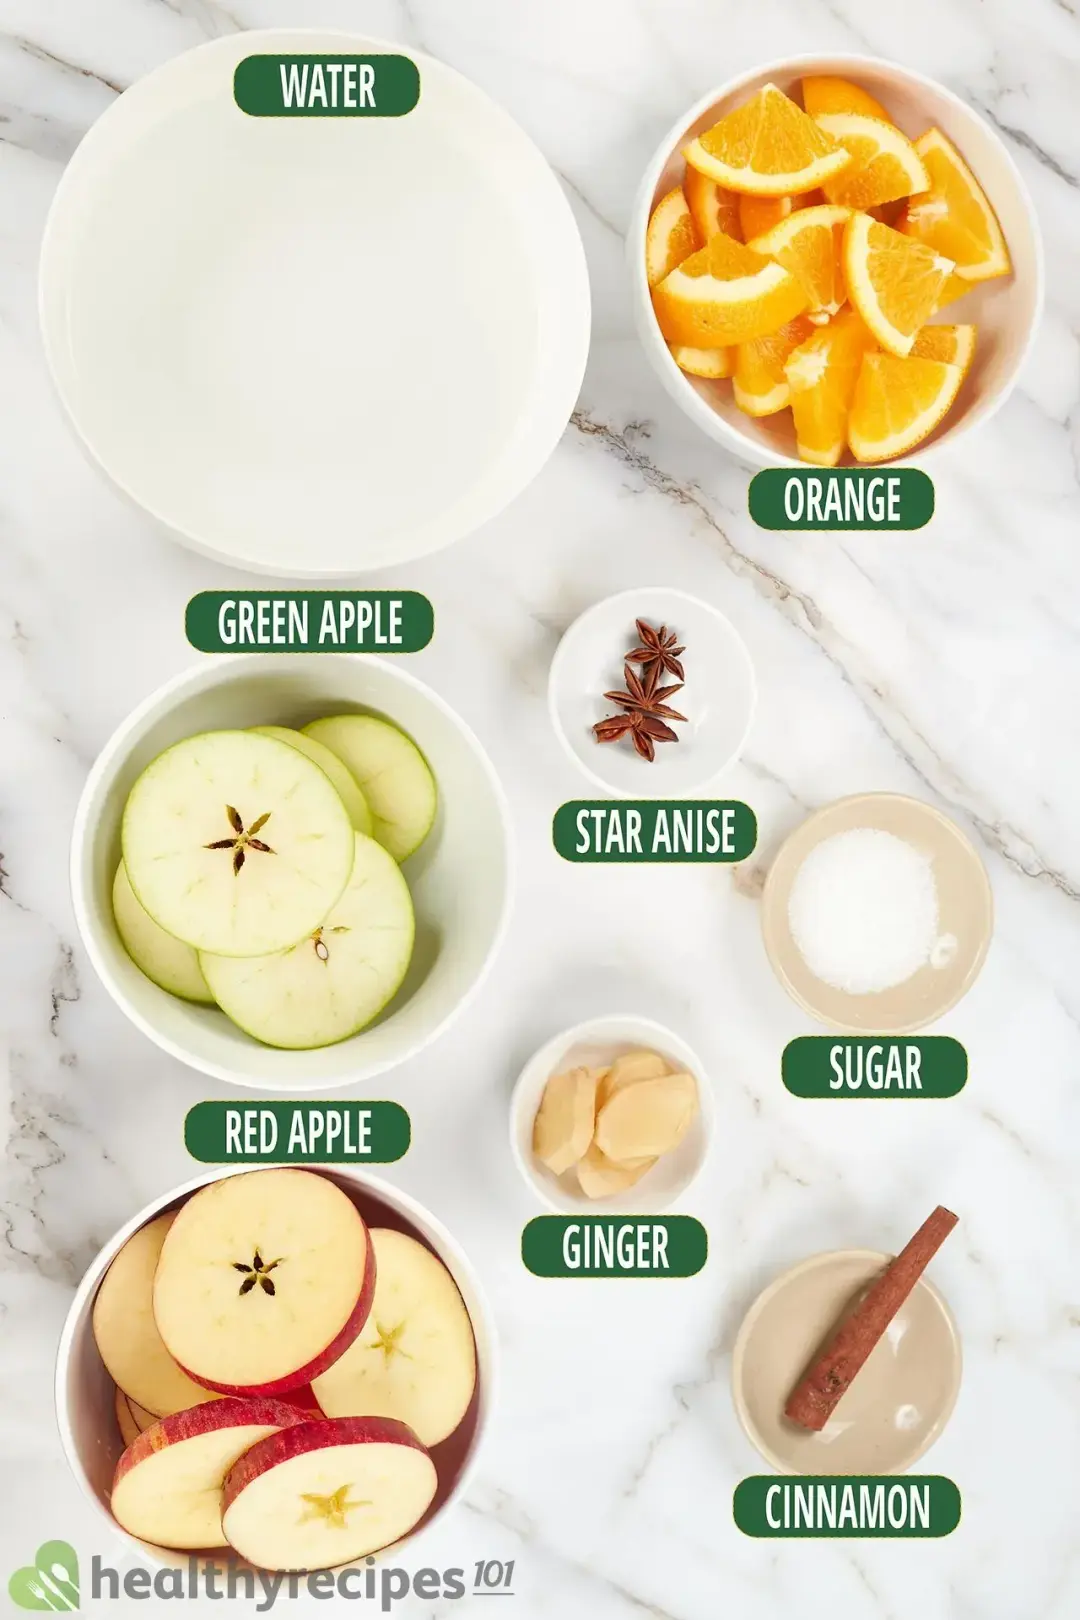 Ingredients in separate bowls: water, orange triangles, green apple slices, red apple slices, star anise, peeled ginger, sugar, and a cinnamon stick